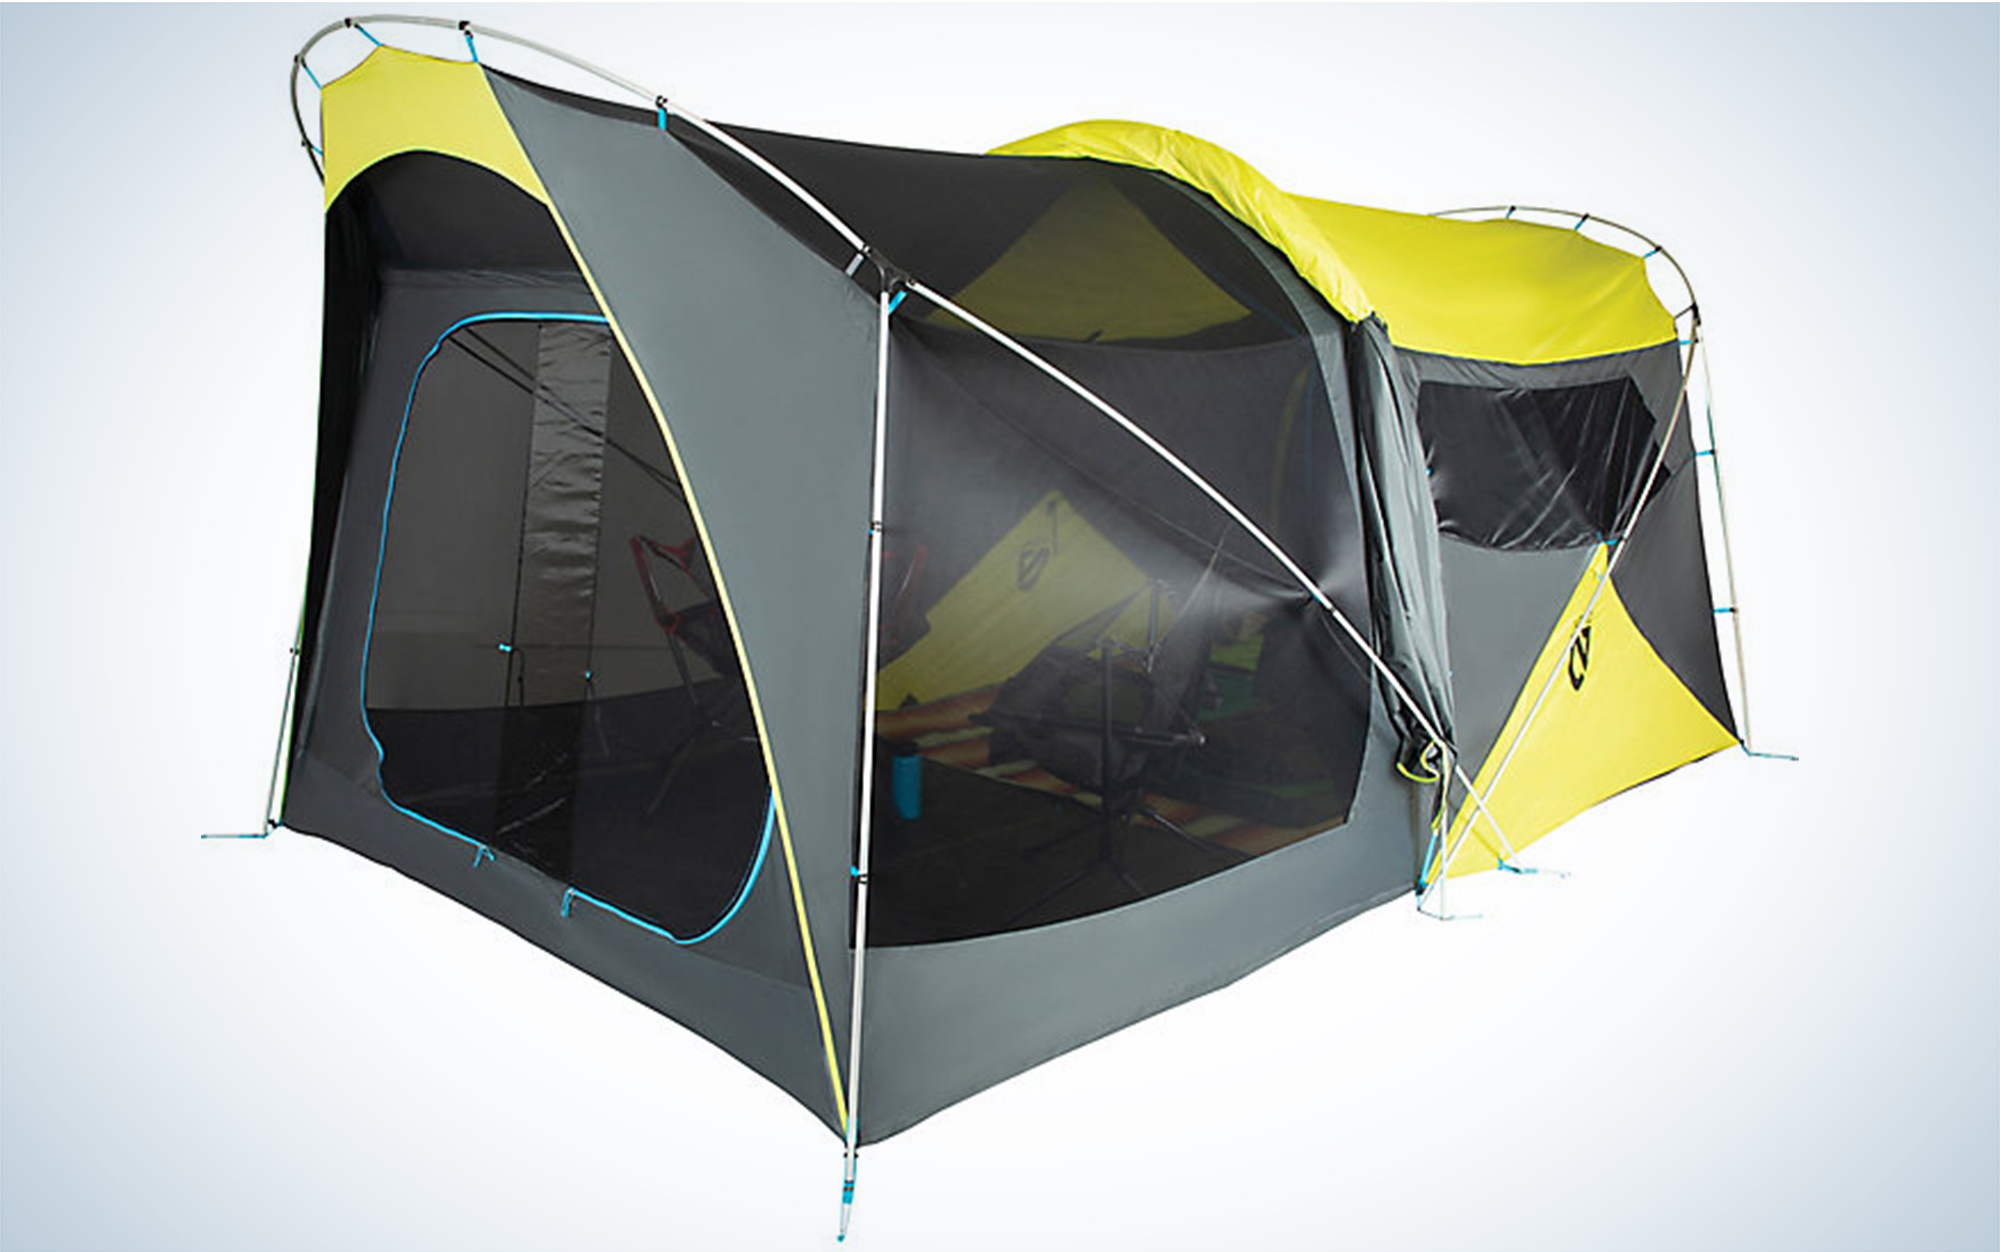 The NEMO Wagontop 8-Person Camping TentÂ is one of the best camping tents.